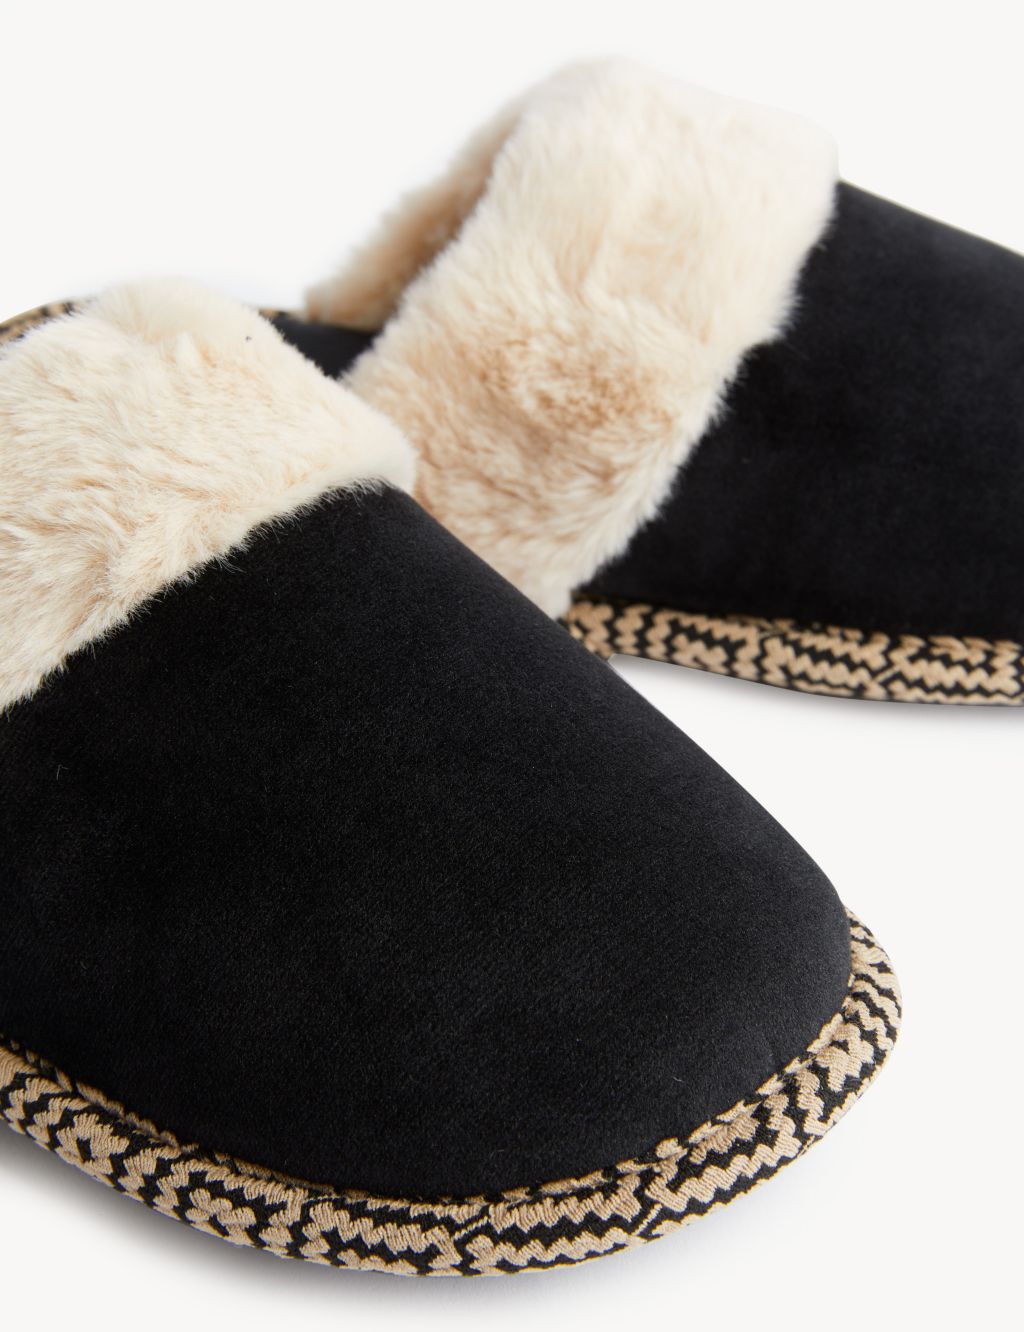 Faux Fur Lined Mule Slippers image 3